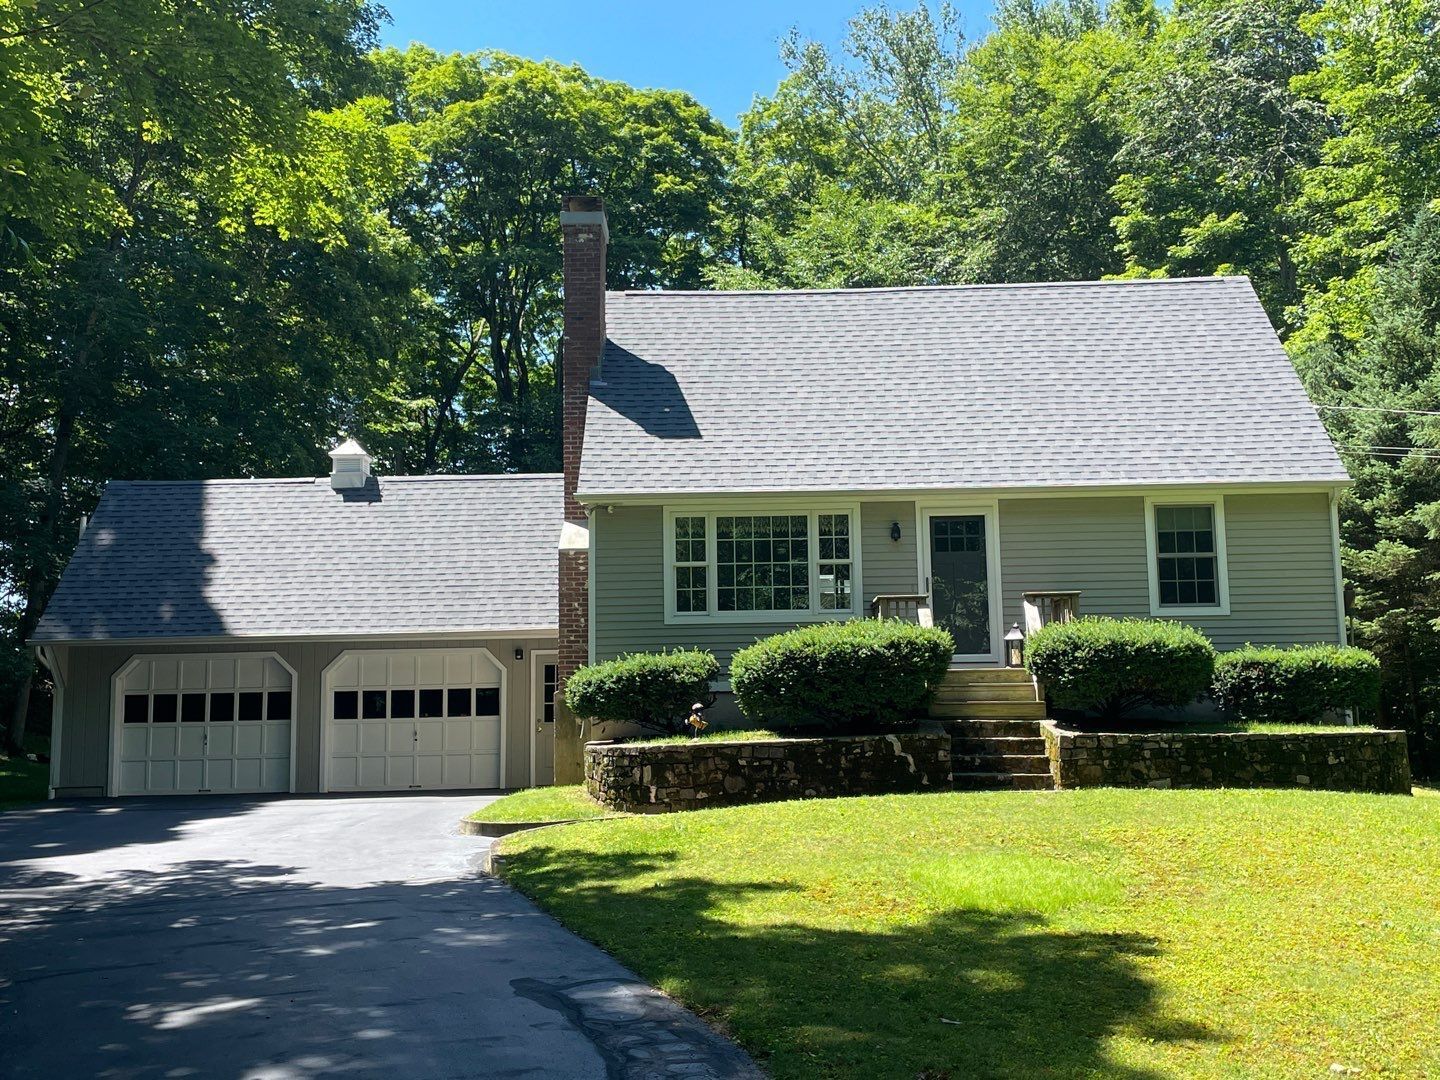 Owens Corning Roof - Estate Gray - New Roof Installation - Martin Roofing & Remodeling, LLC - Killingworth, CT